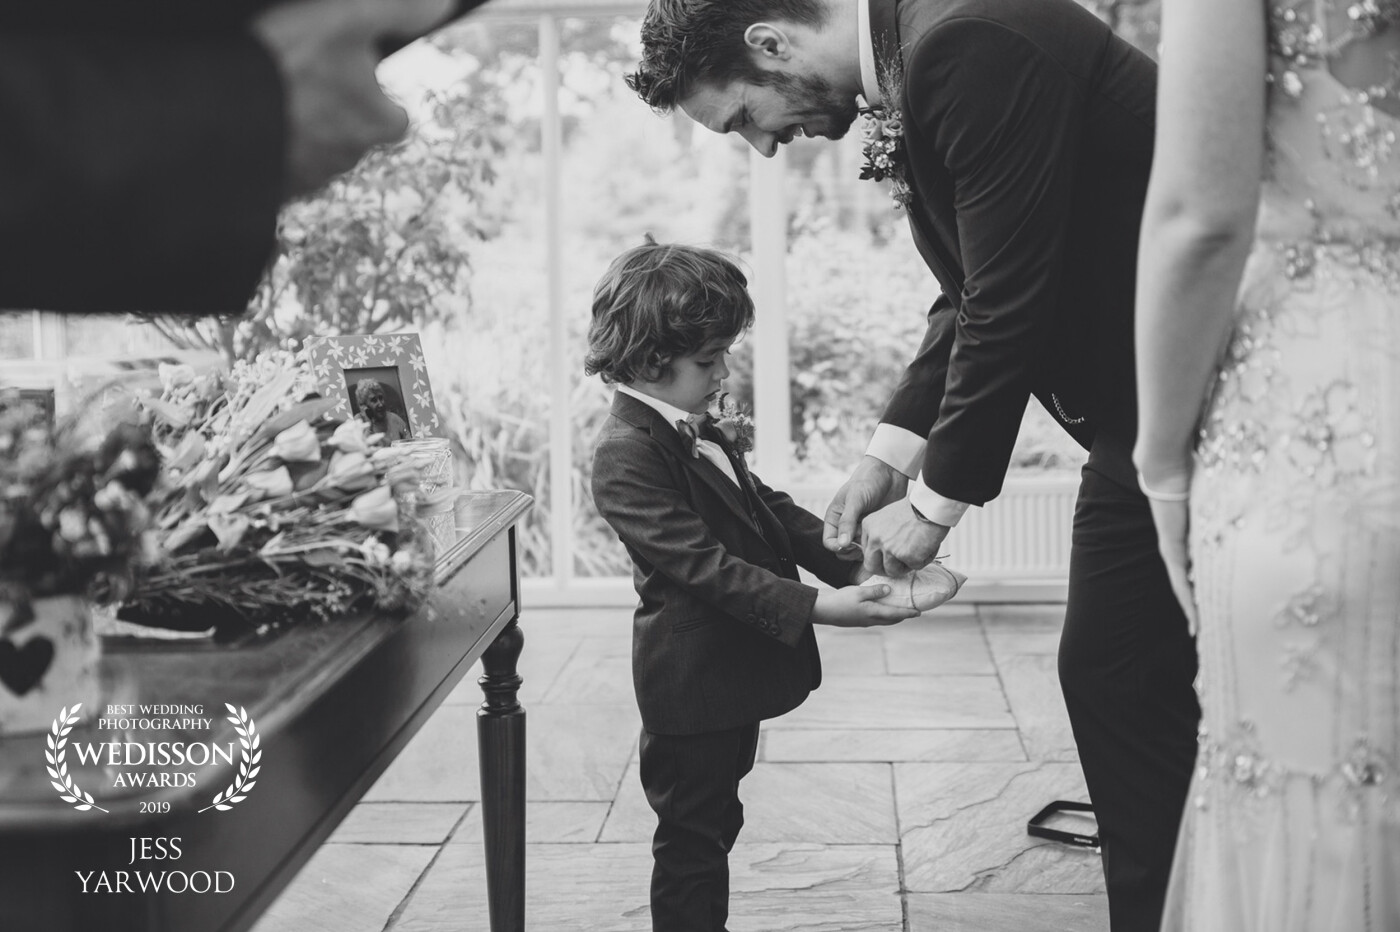 Shooting a beautiful summer wedding with a relaxed and fun-loving couple at Abbeywood Estate in the Uk. <br />
Their ring bearer did an excellent job providing the rings and took his role very seriously!